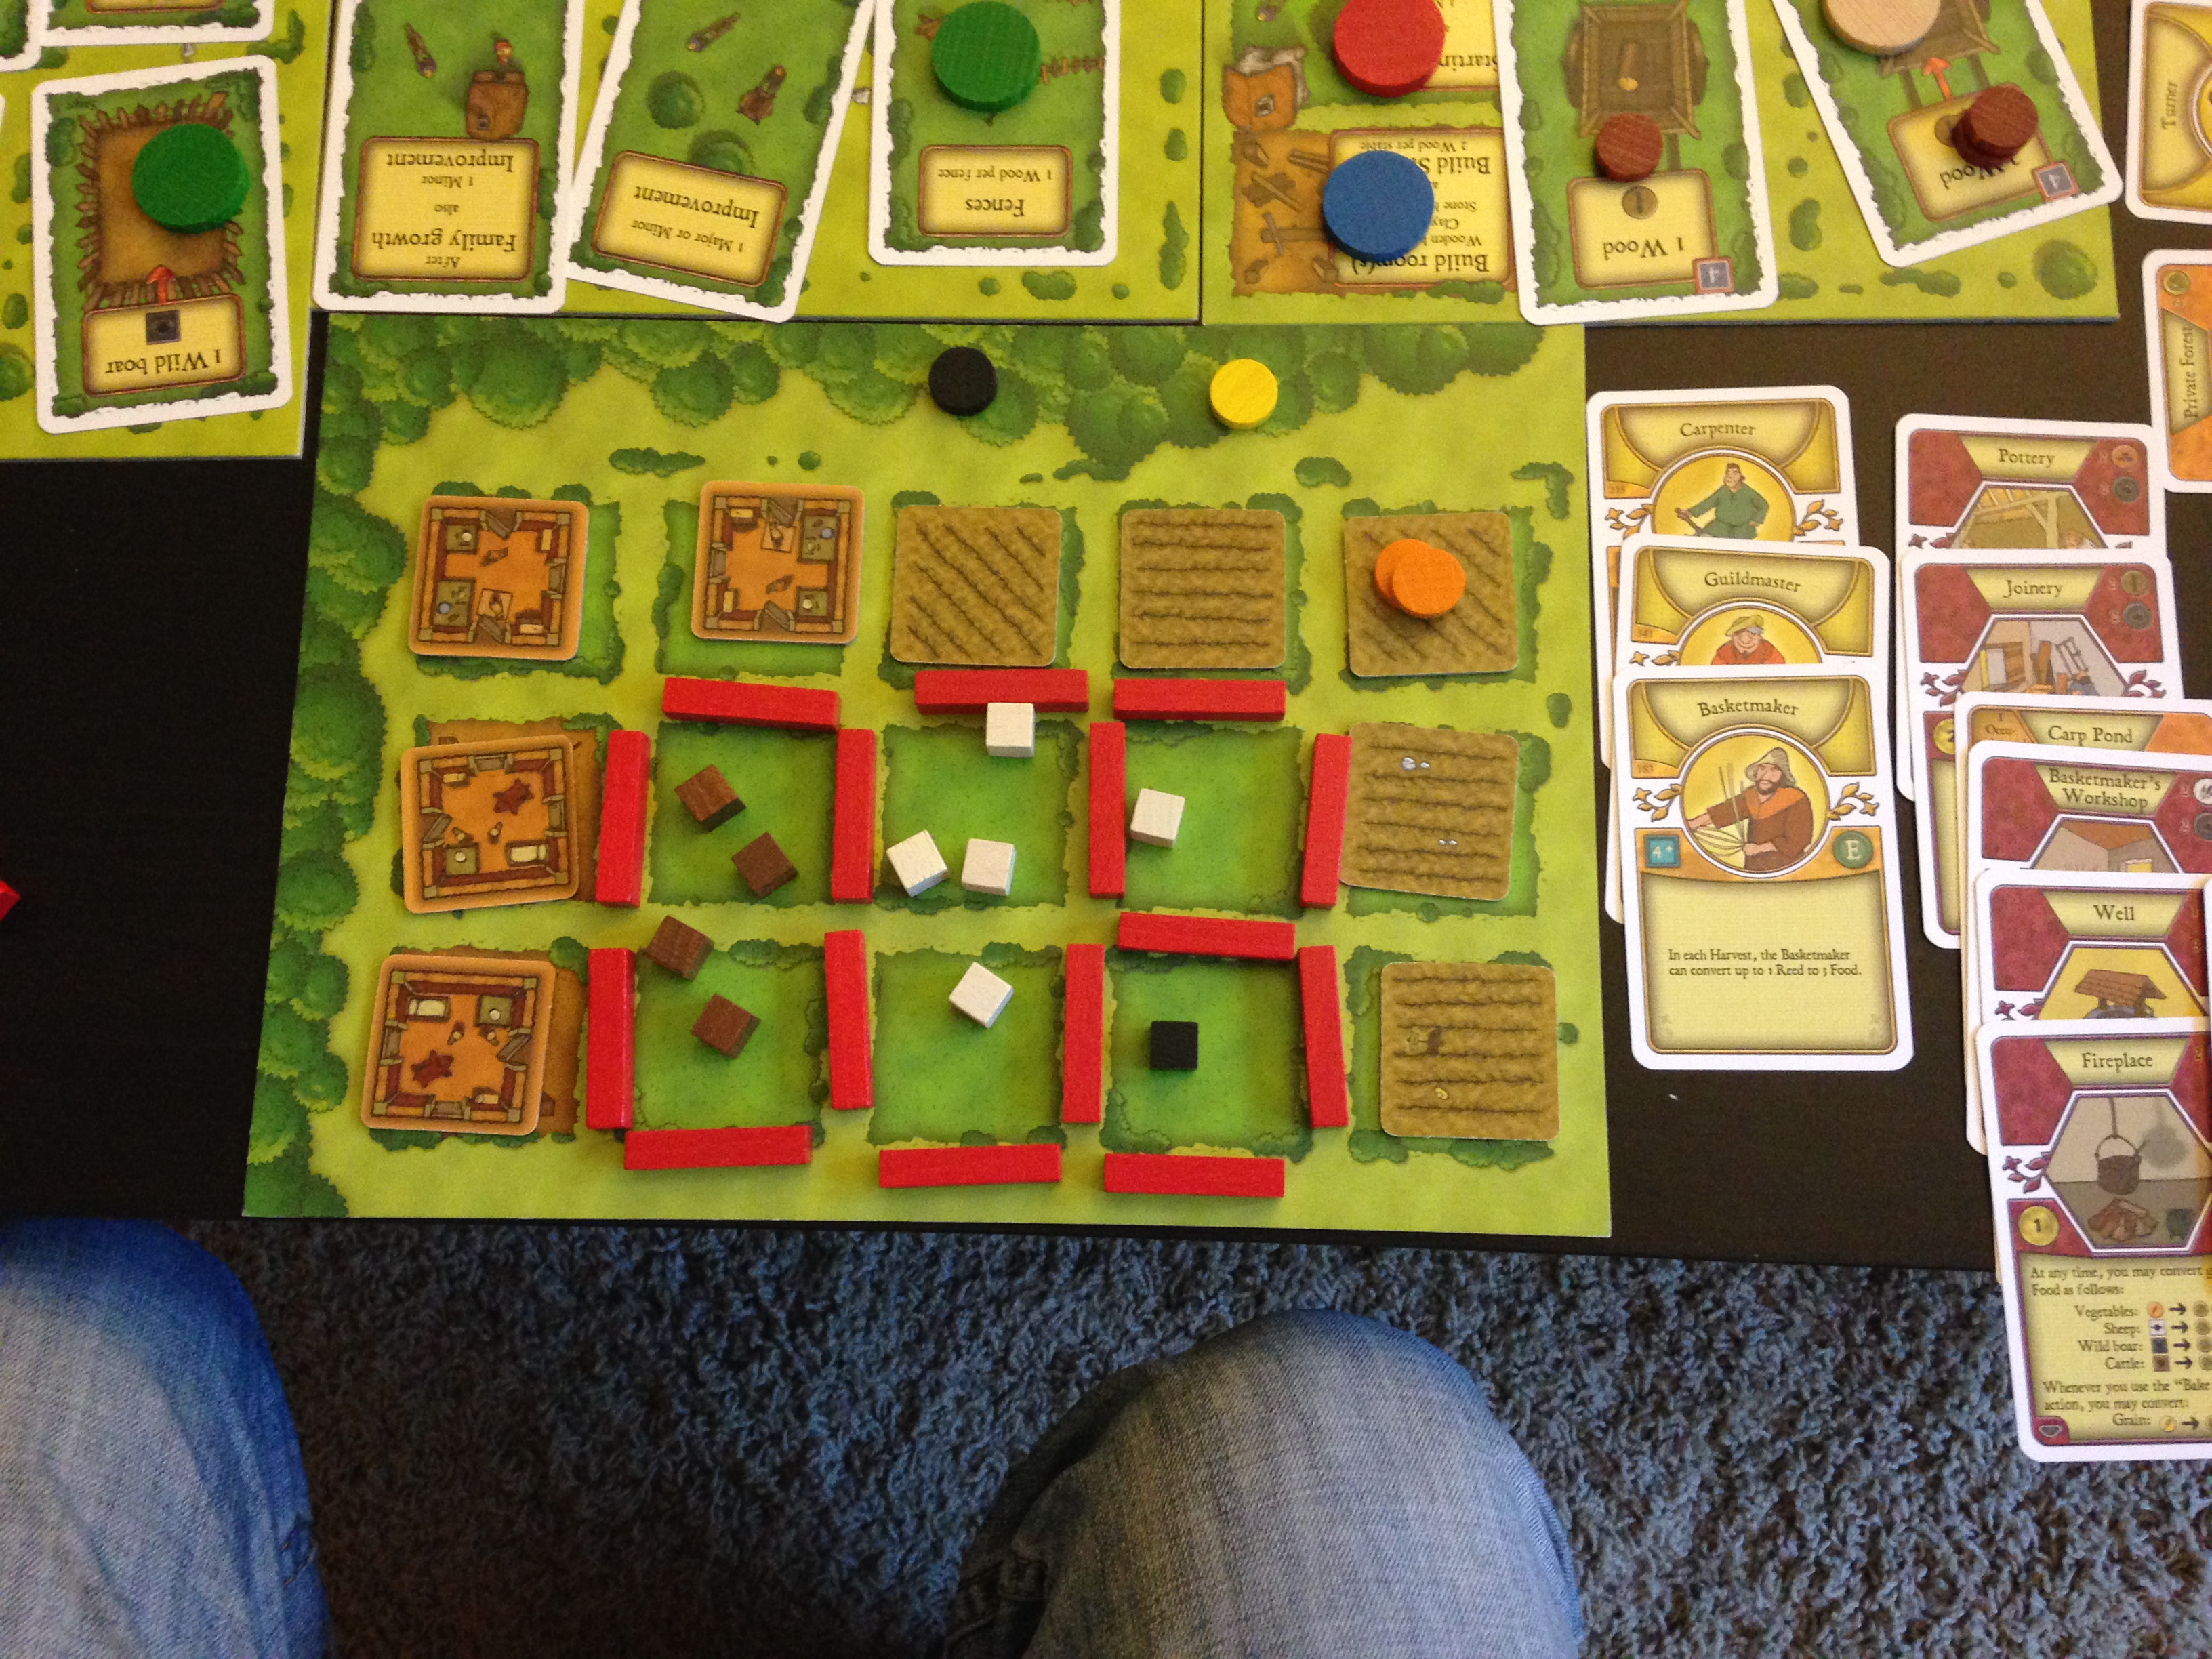 Mayfair's Agricola Board Game - My Board Game Guides